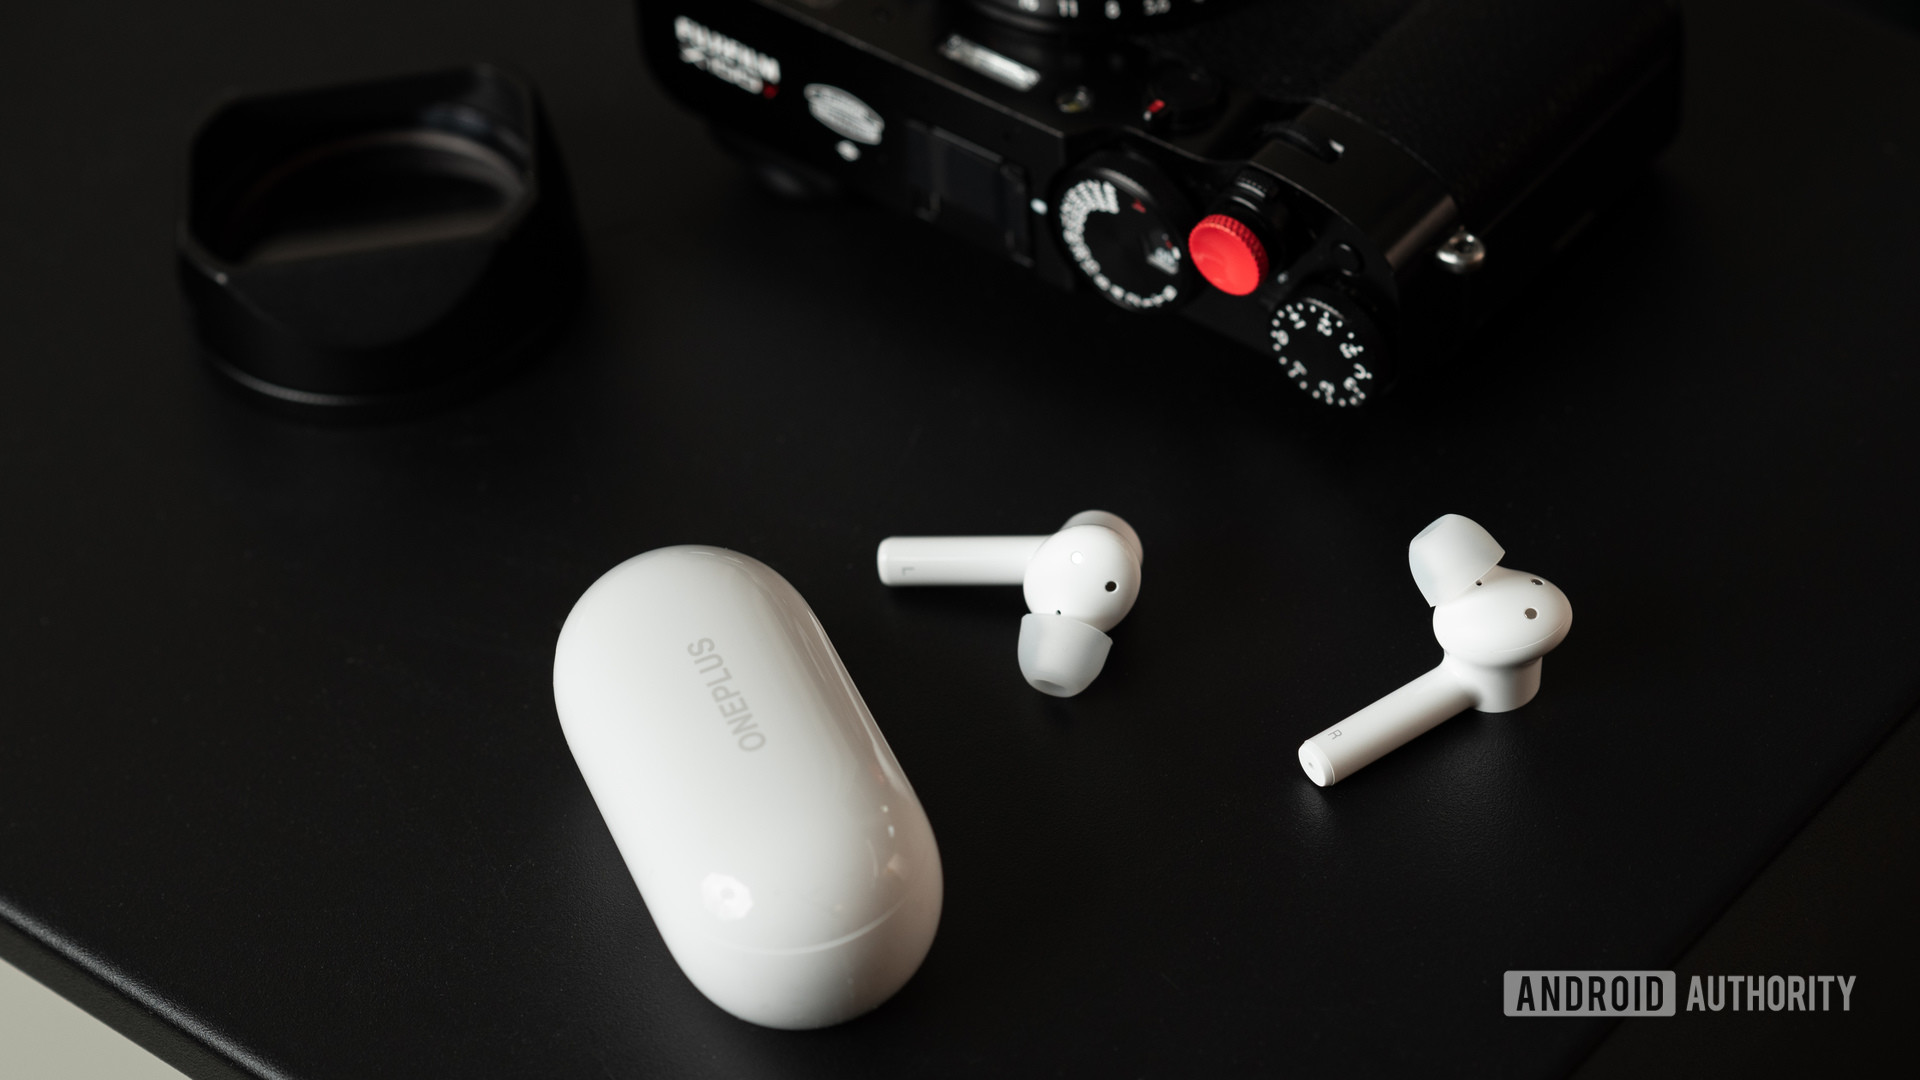 The OnePlus Buds Z cheap true wireless earbuds on a table next to a camera and the charging case.